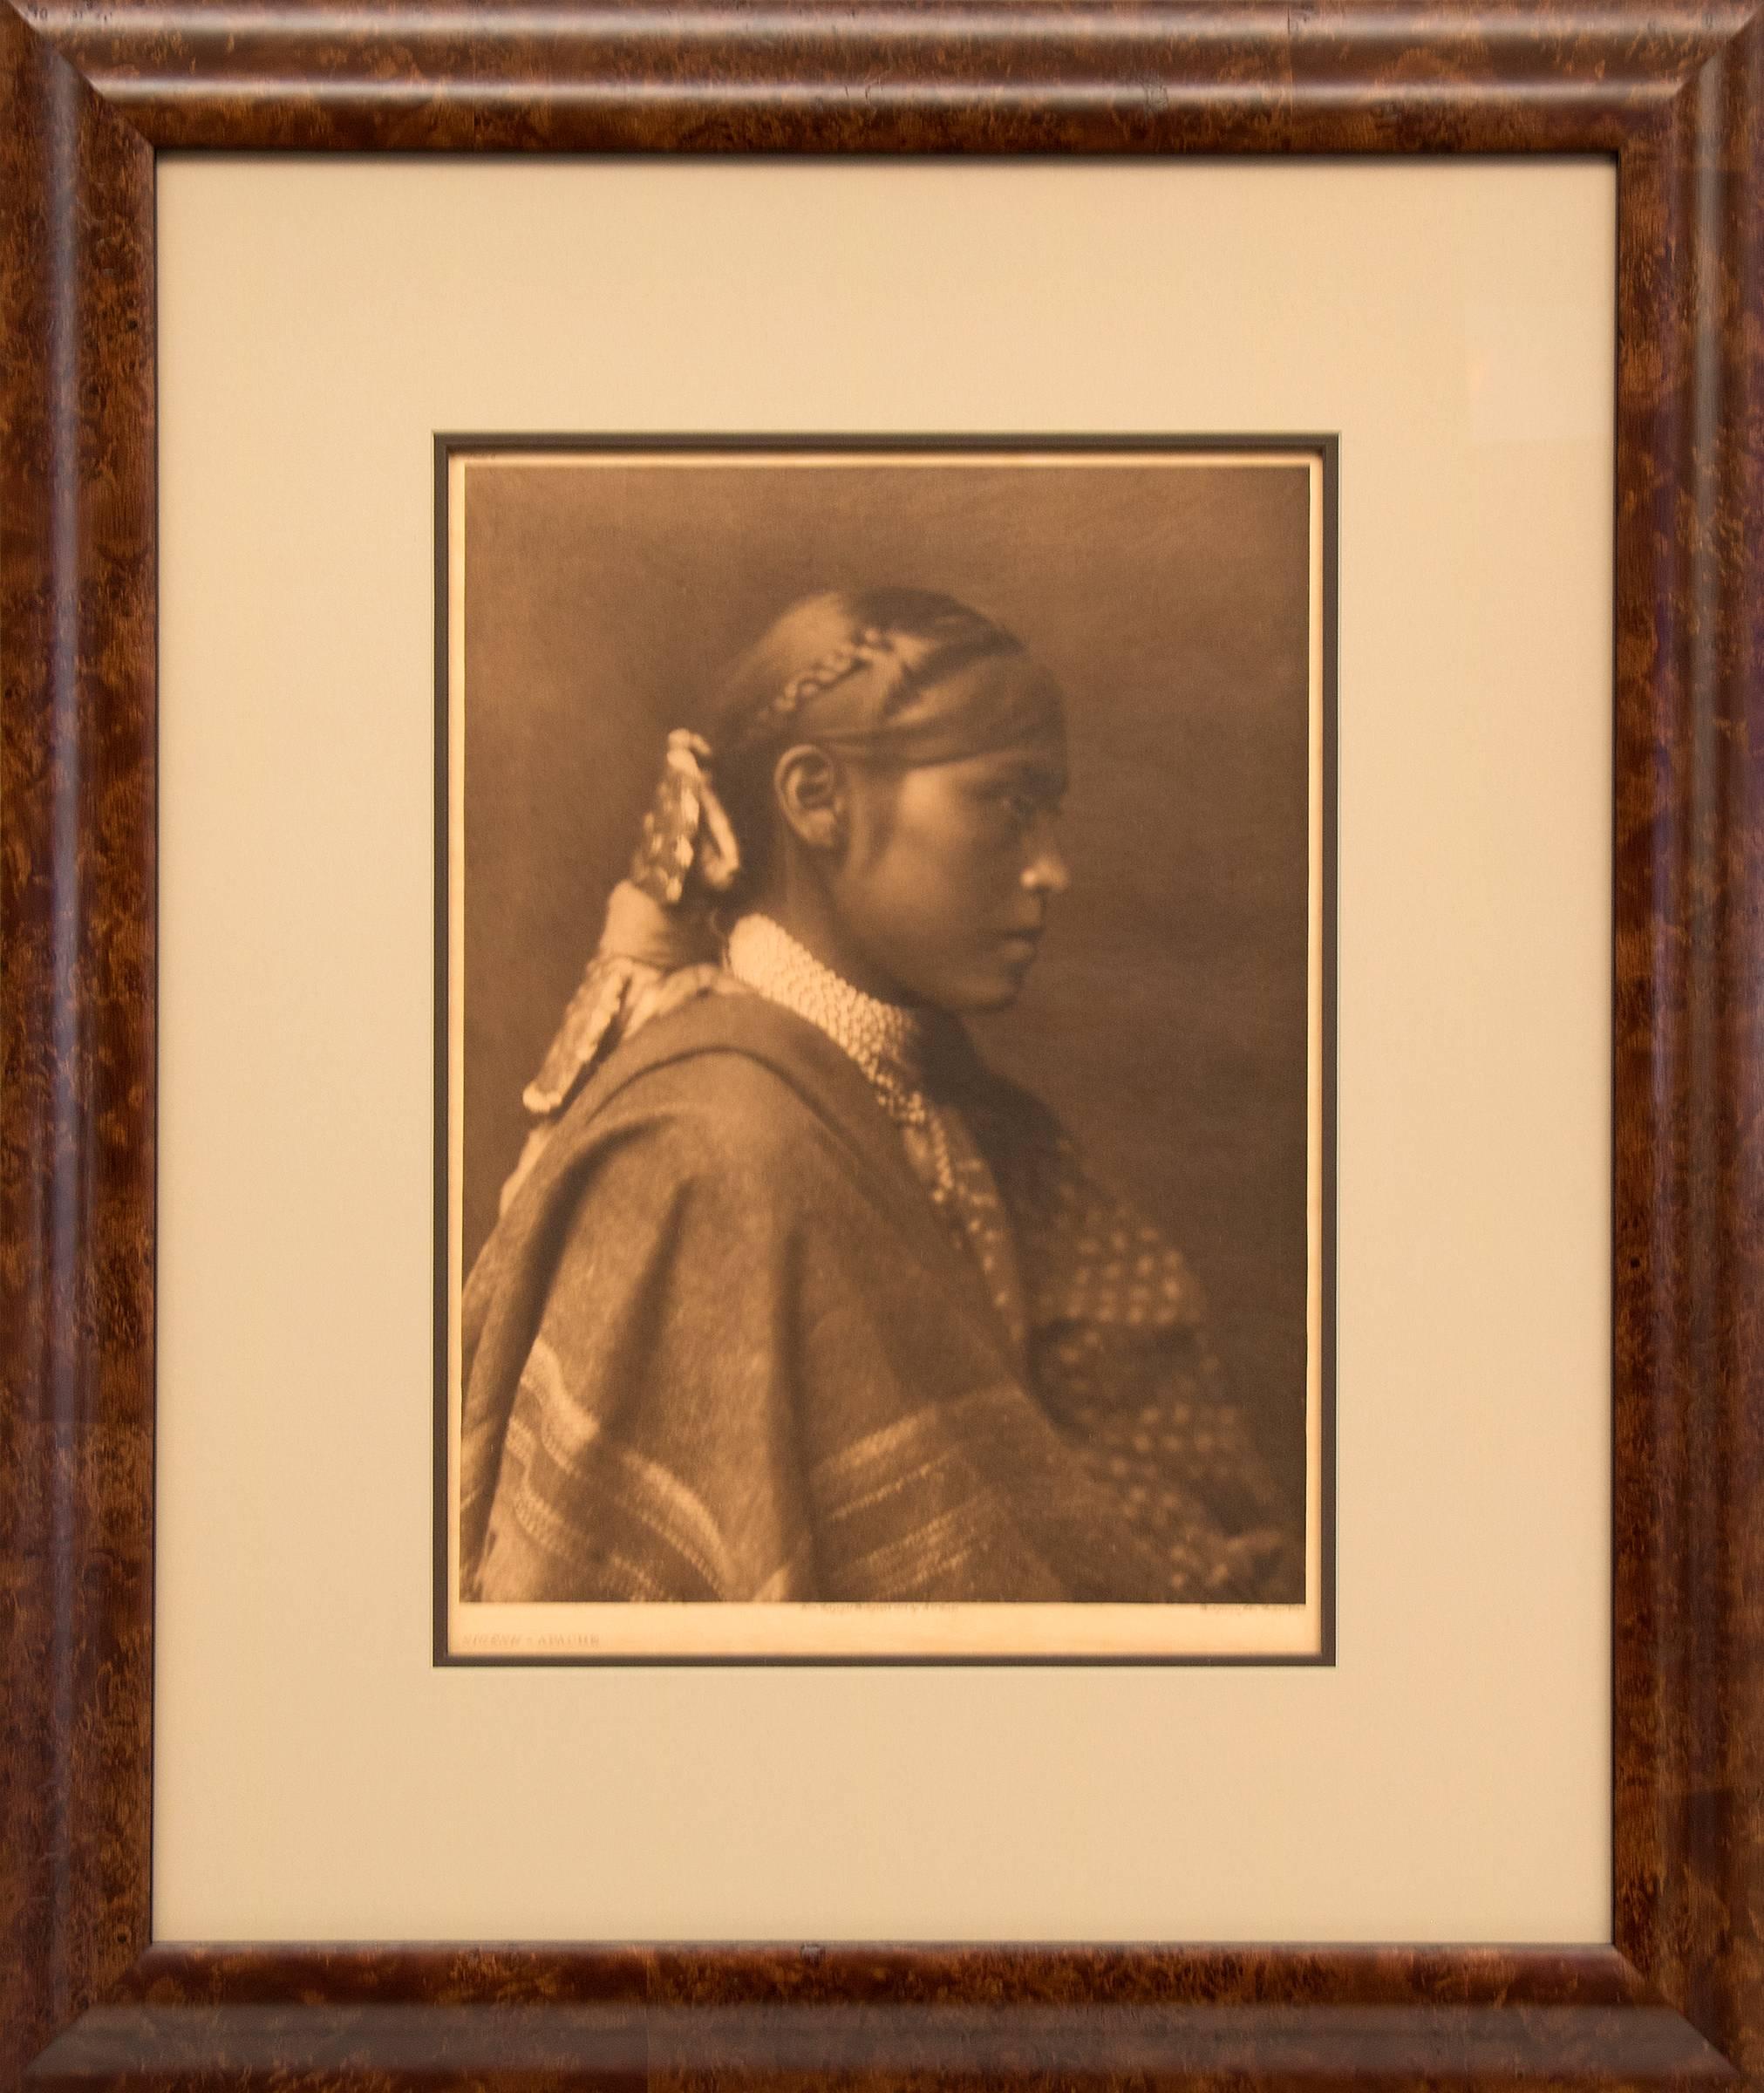  A large format Photogravure by Edward Sheriff Curtis (1868-1952) printed on (Dutch) Holland Van Gelder, a hand-made paper; sheet size is 18 x 22 inches.  Image measures 16 x 12 inches. 

Housed in a custom frame with all archival materials; outer